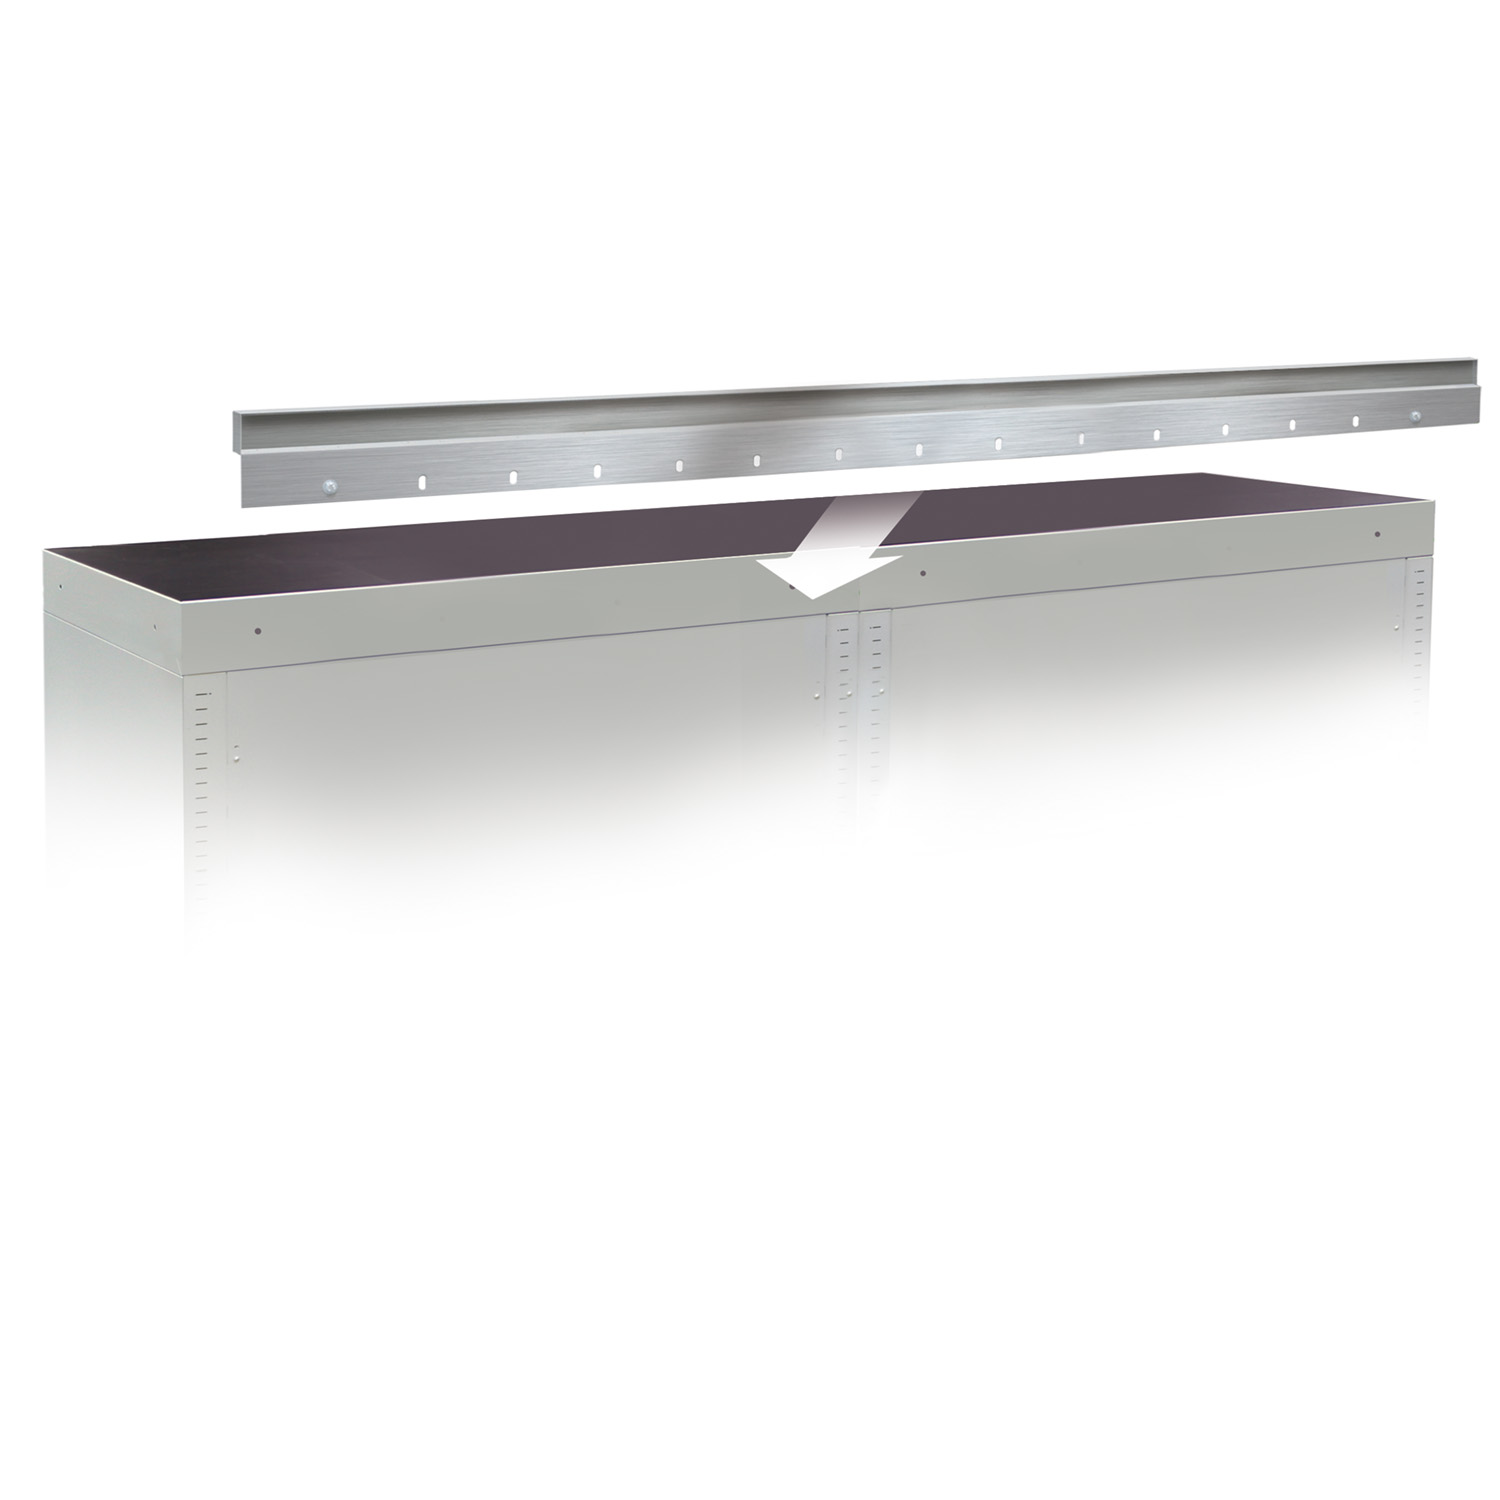 Stainless steel up-stand (50mm x 1800mm)